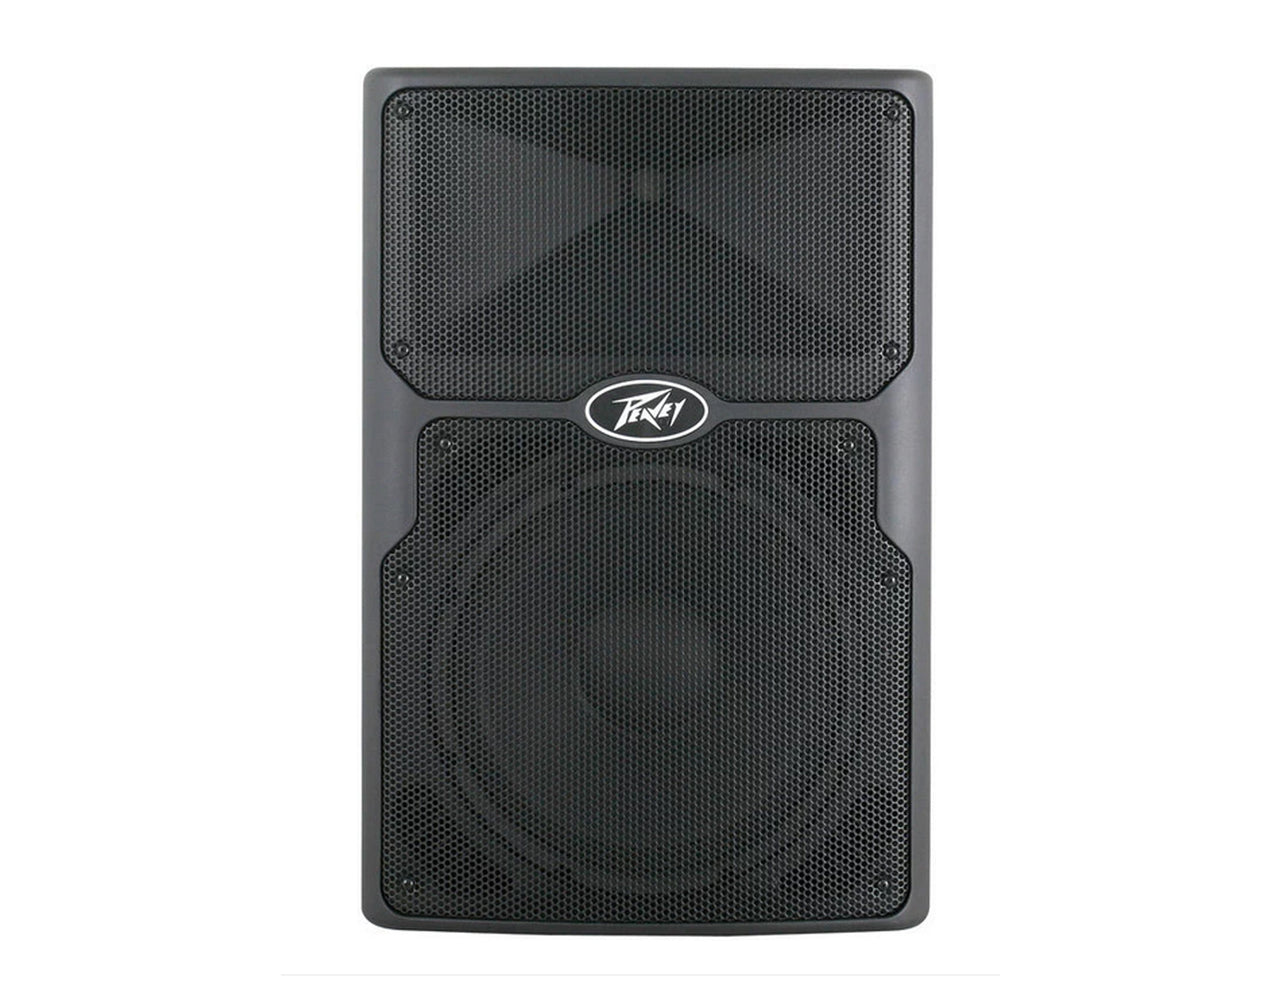 Peavey PVXP15 DSP 15 inch Powered Speaker 800W 15" Powered Speaker with 1.4" Compression Driver